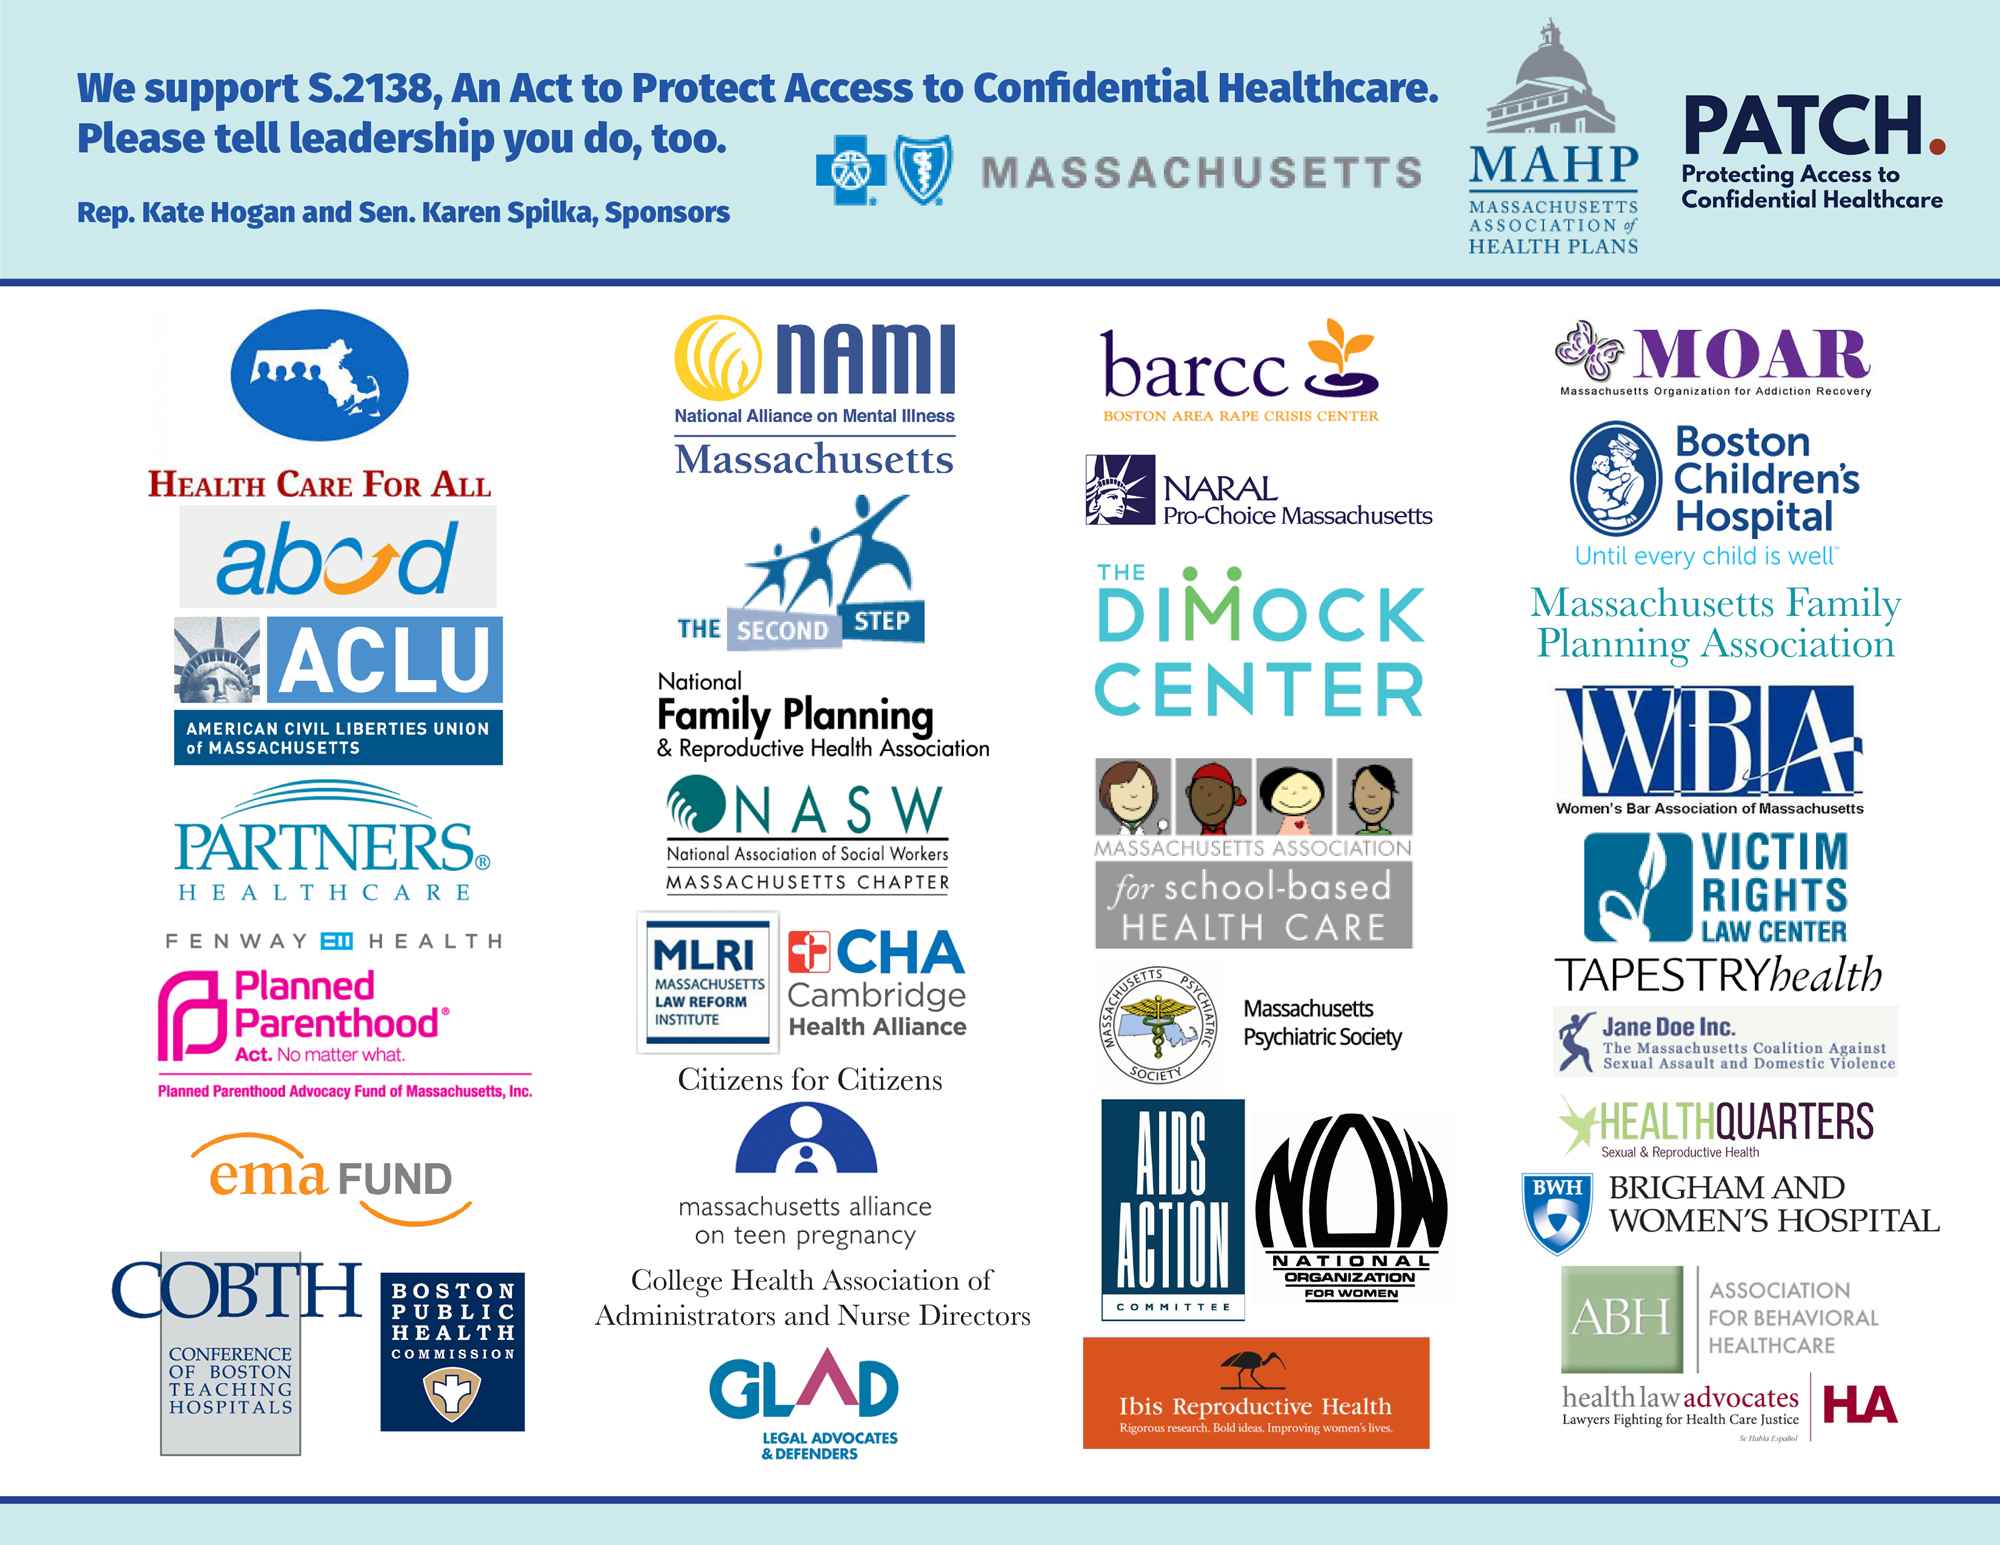 Graphic listing supporters of An Act to Protect Access to Confidential Healthcare